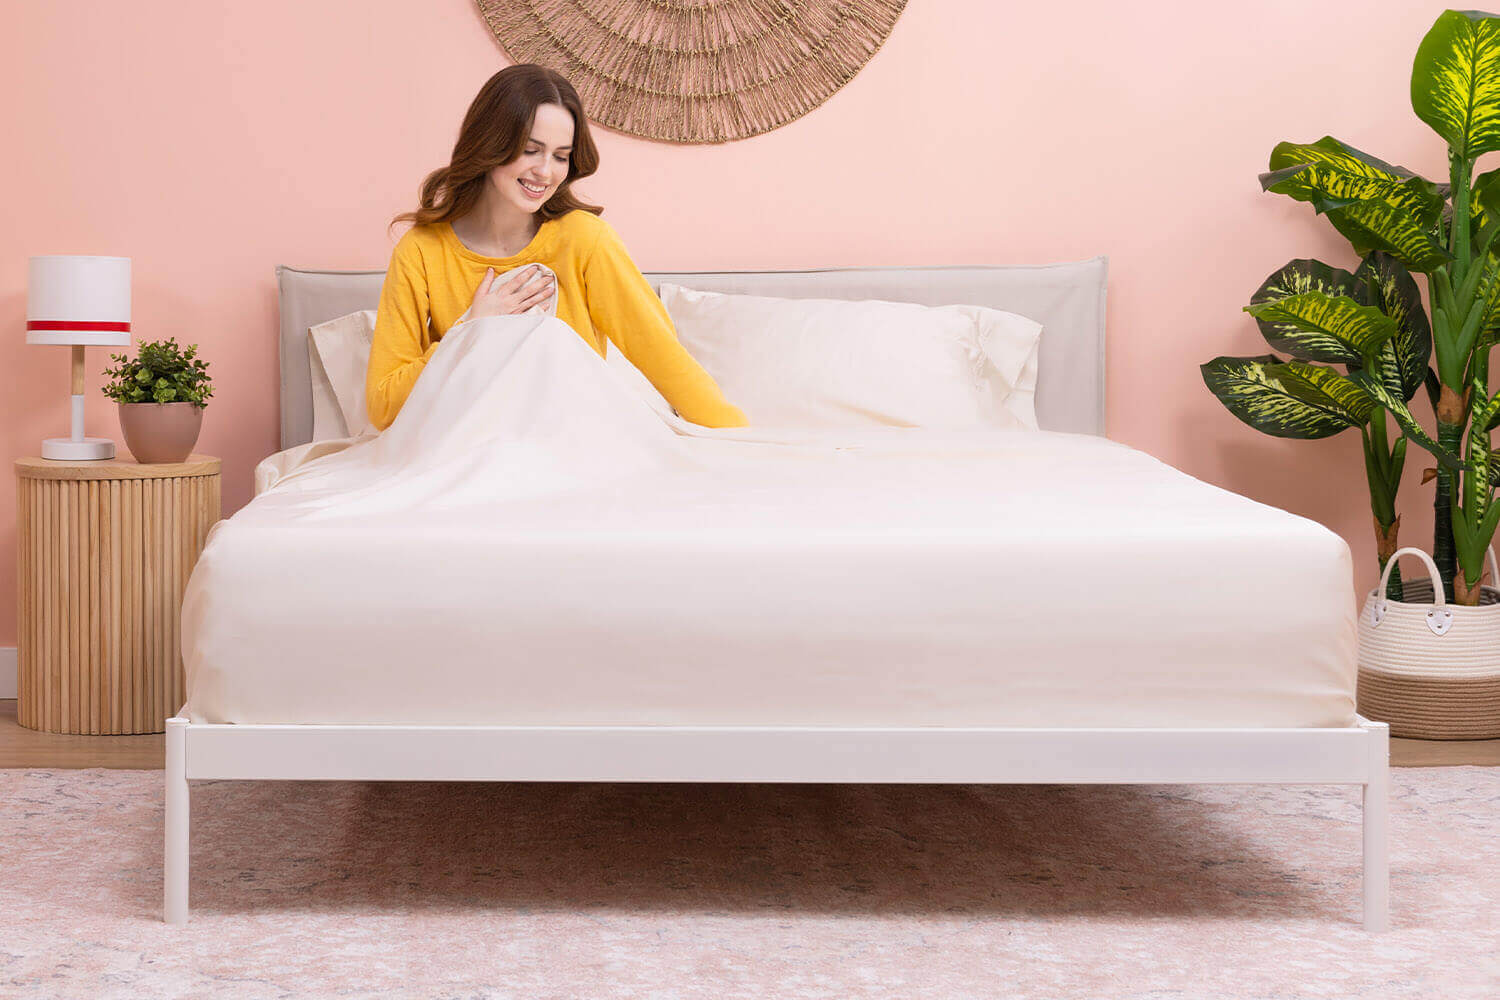 Woman sitting in bed and touching her Douglas Egyptian Cotton Sheets